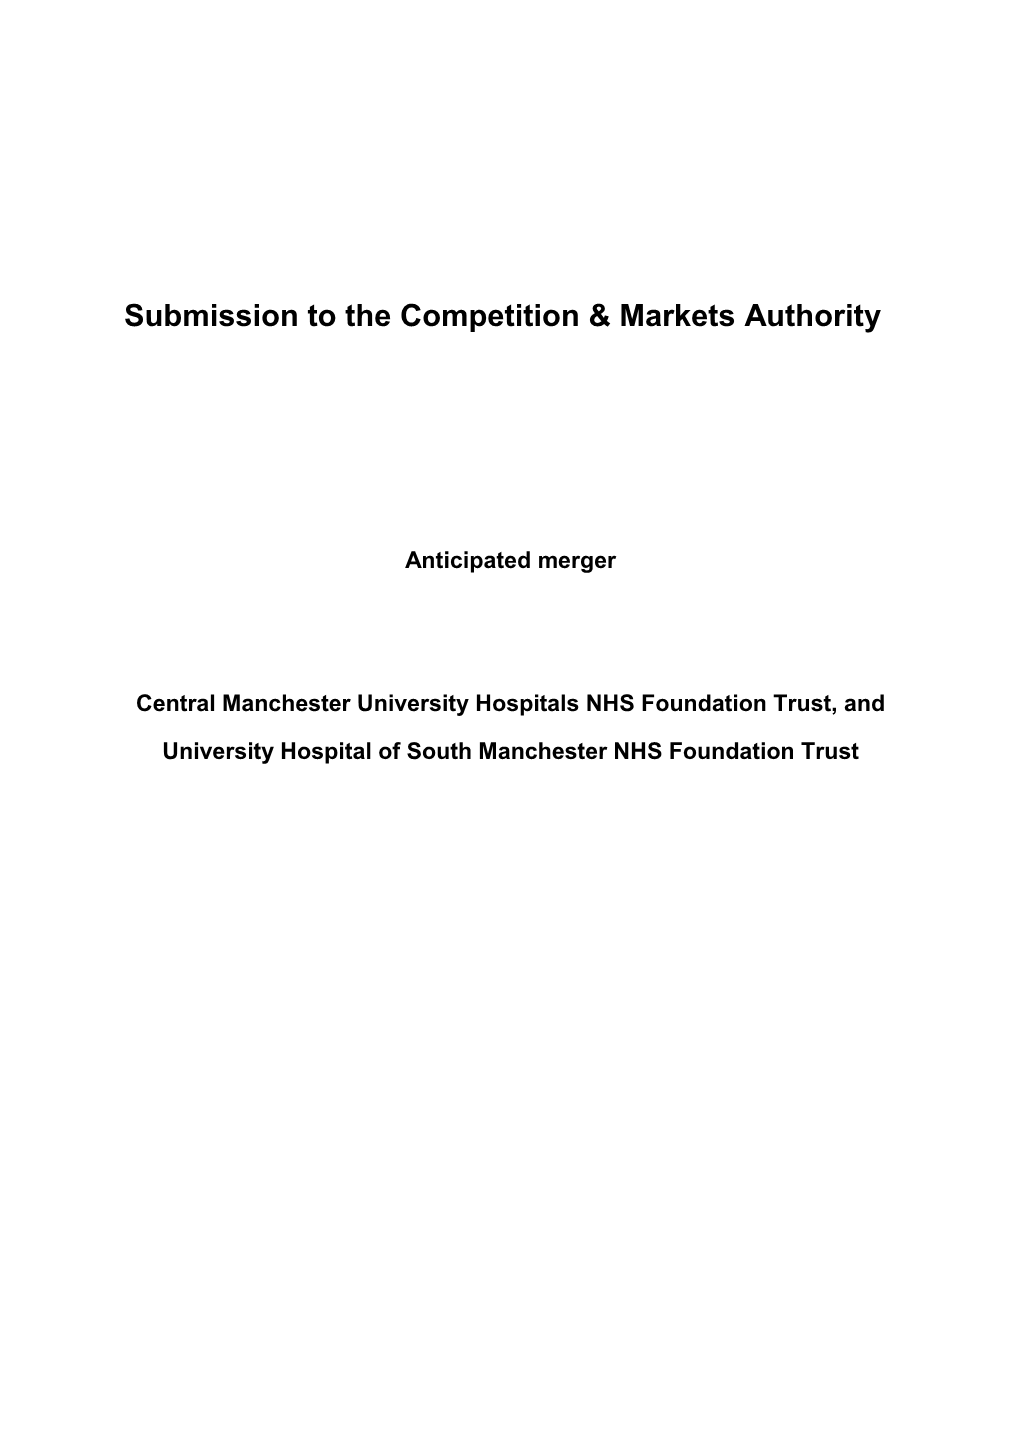 CMFT/UHSM: Phase 1 Submission